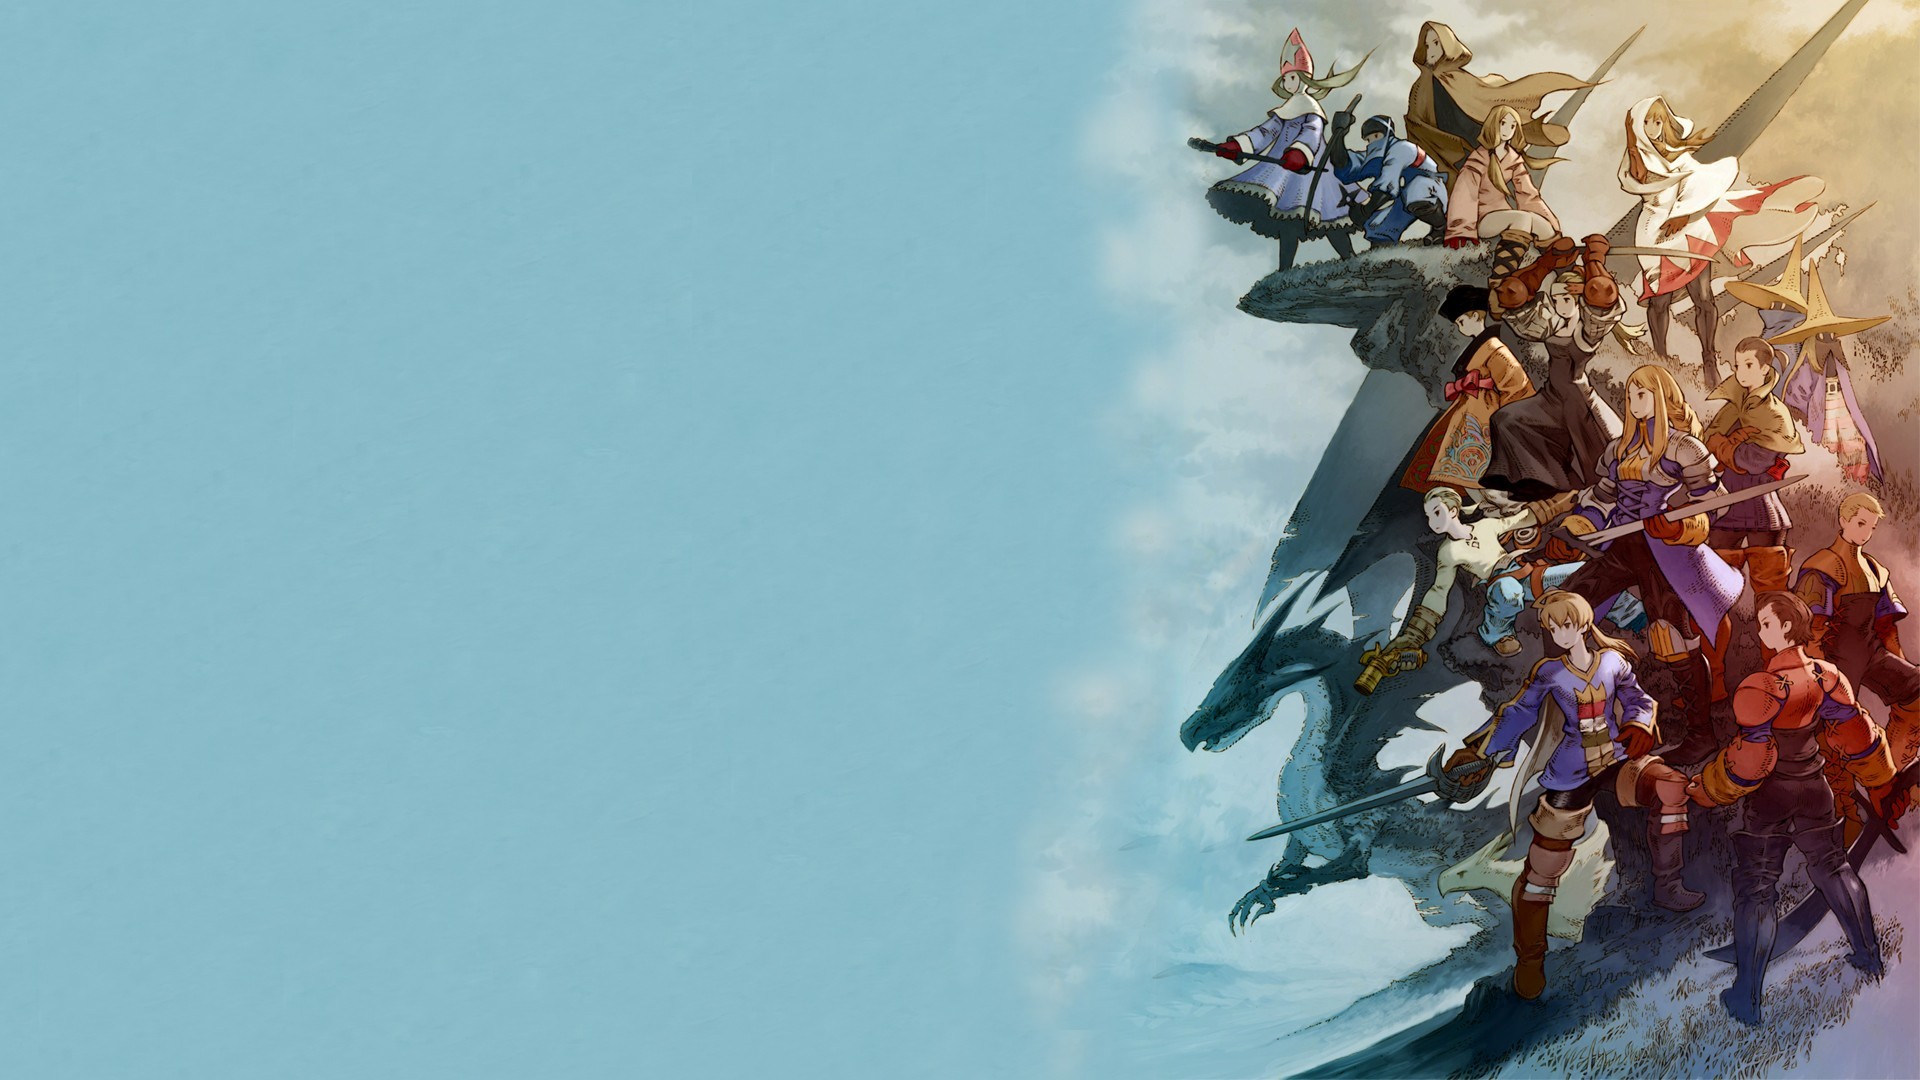 General Final Fantasy Final Fantasy Tactics War of the Lions Ramza White Mage Red Mage